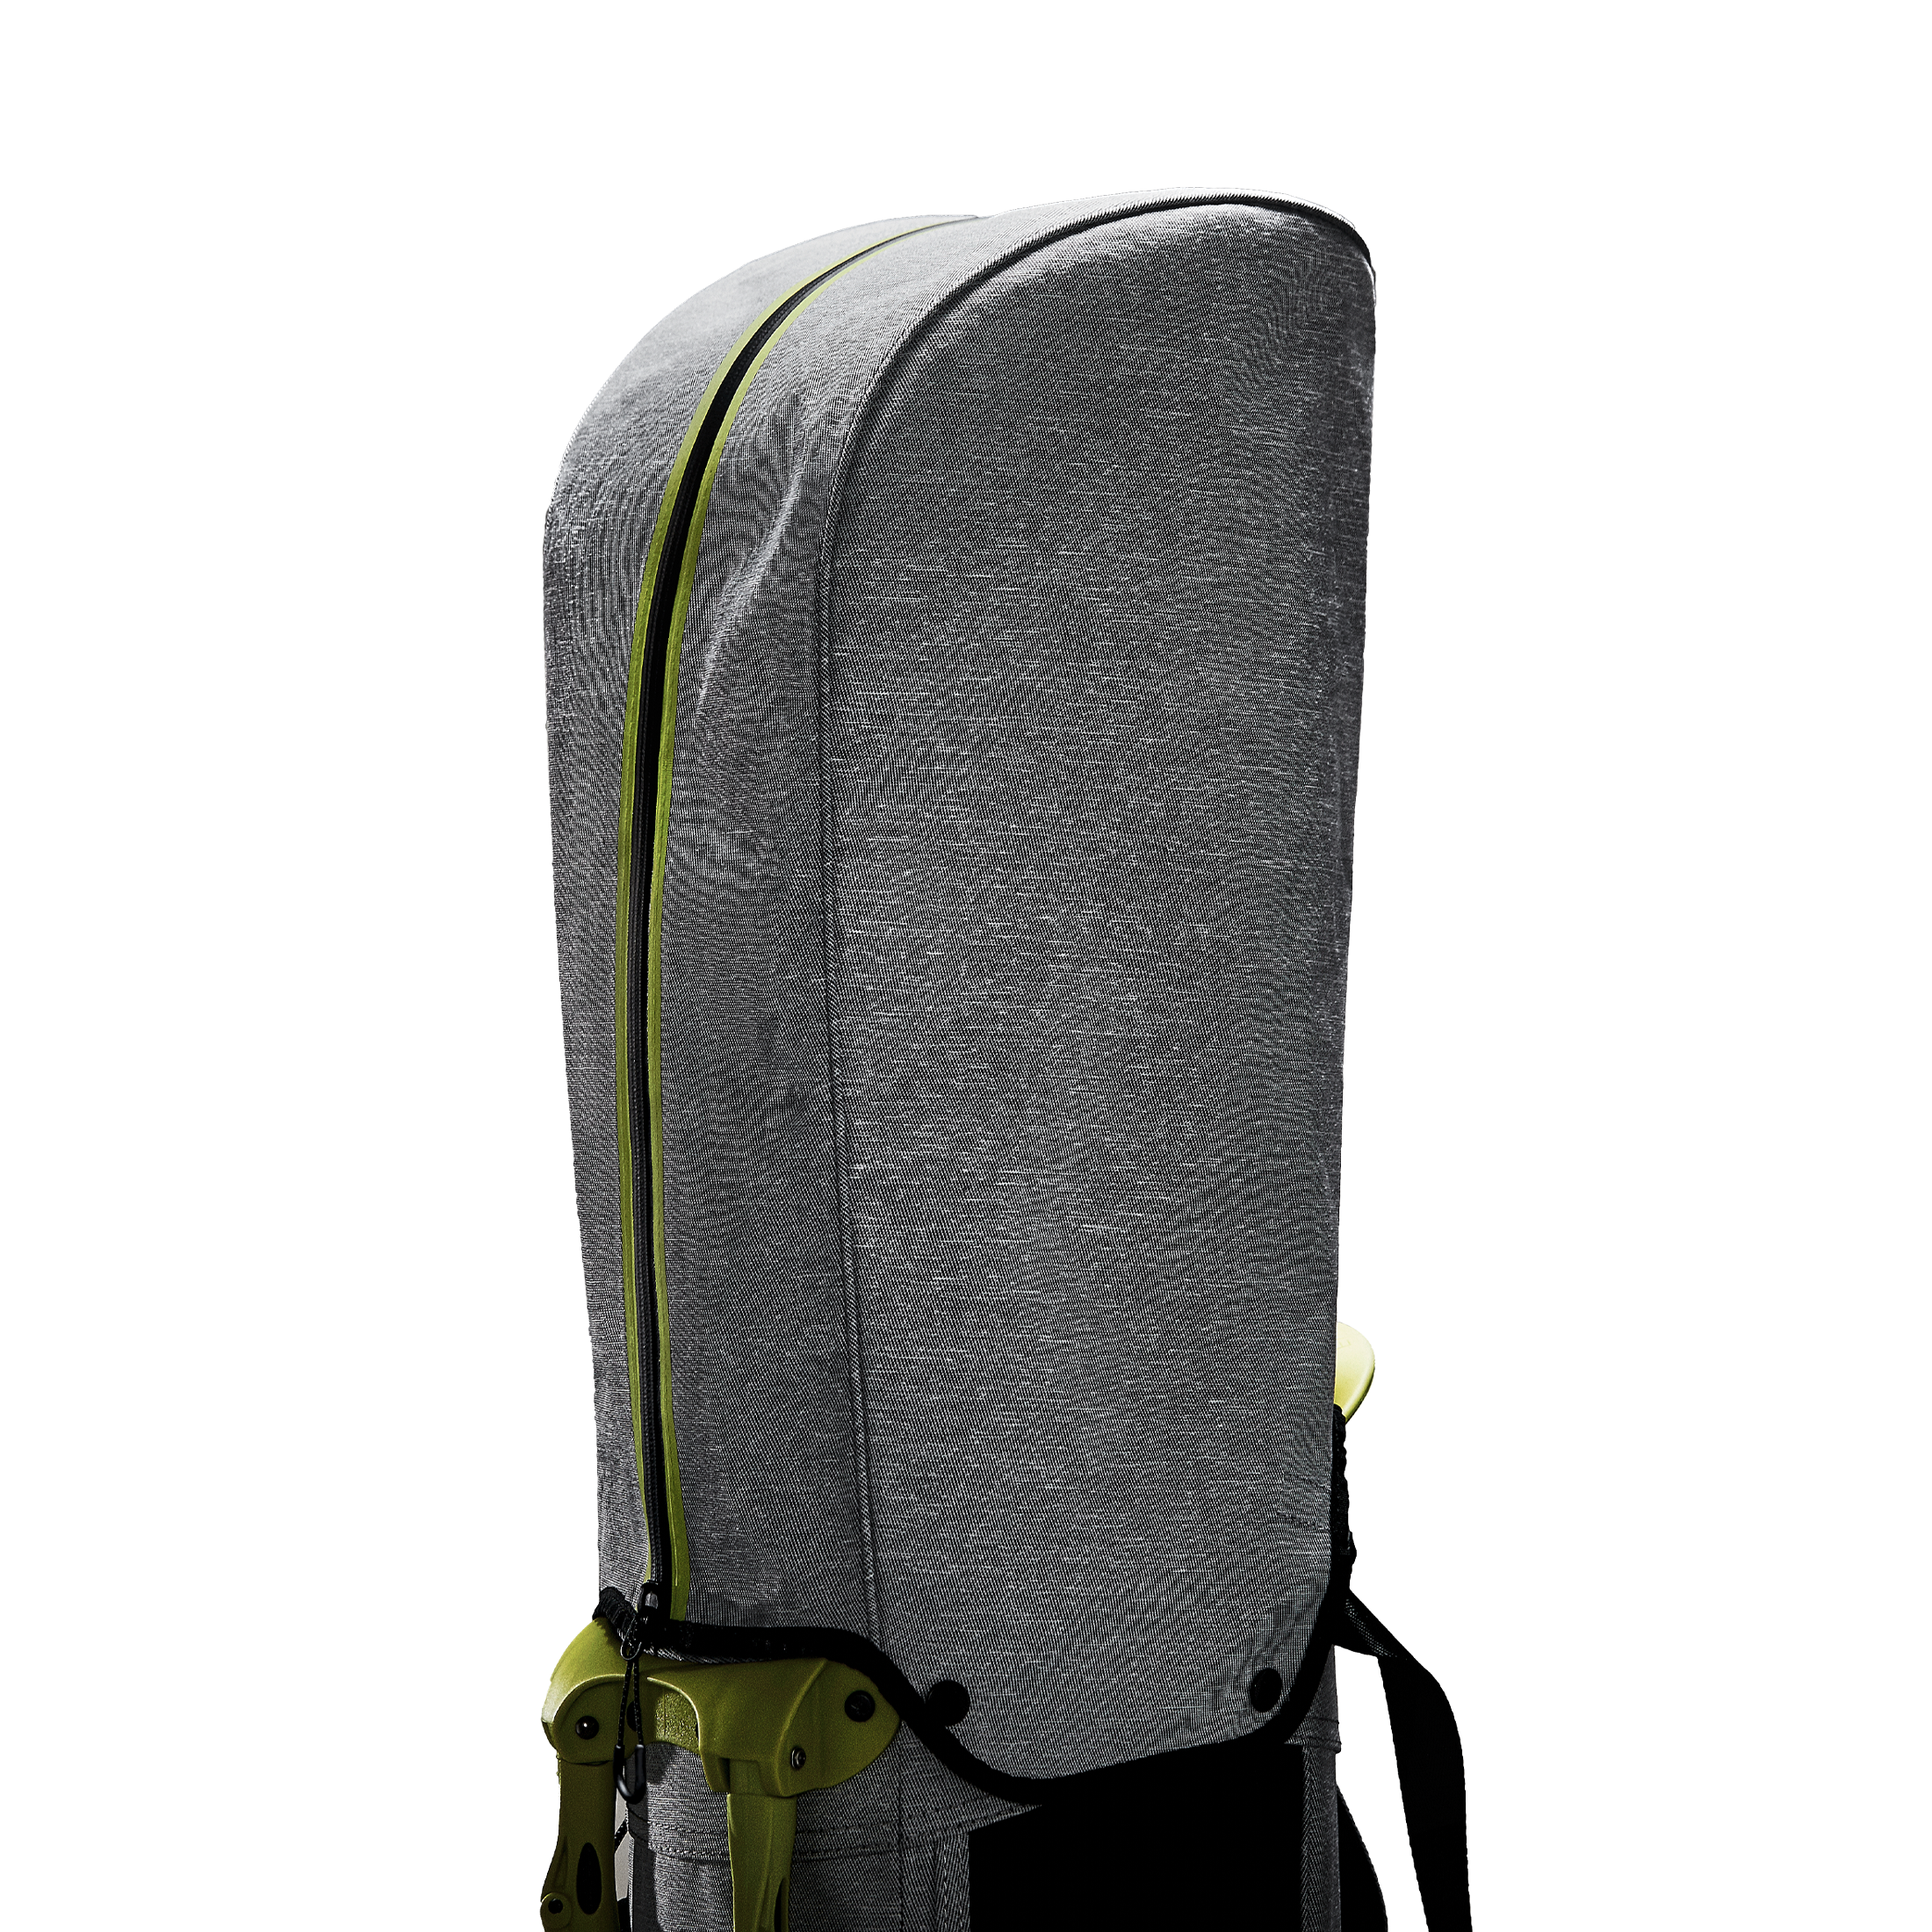 Vice Golf Force Stand Bag - Grey and Neon Lime - image 4 of 11